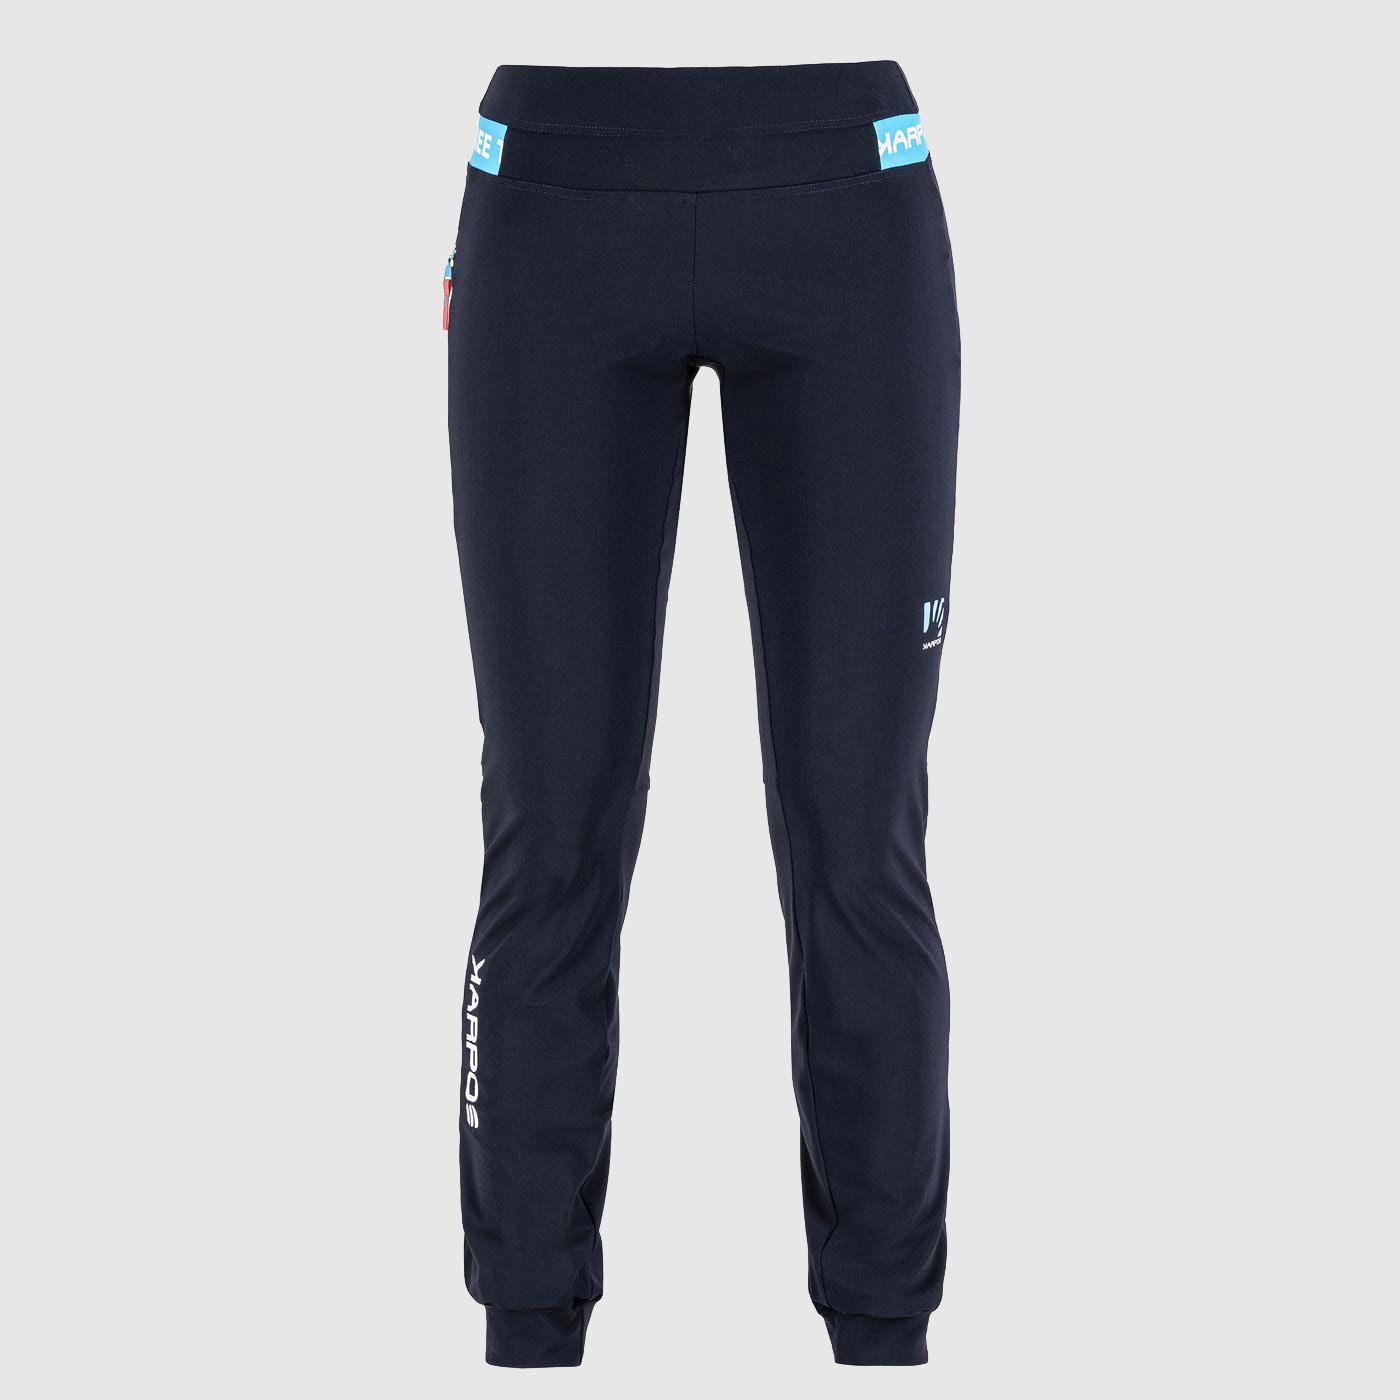 Buy Blue & Black Trousers & Pants for Women by Kryptic Online